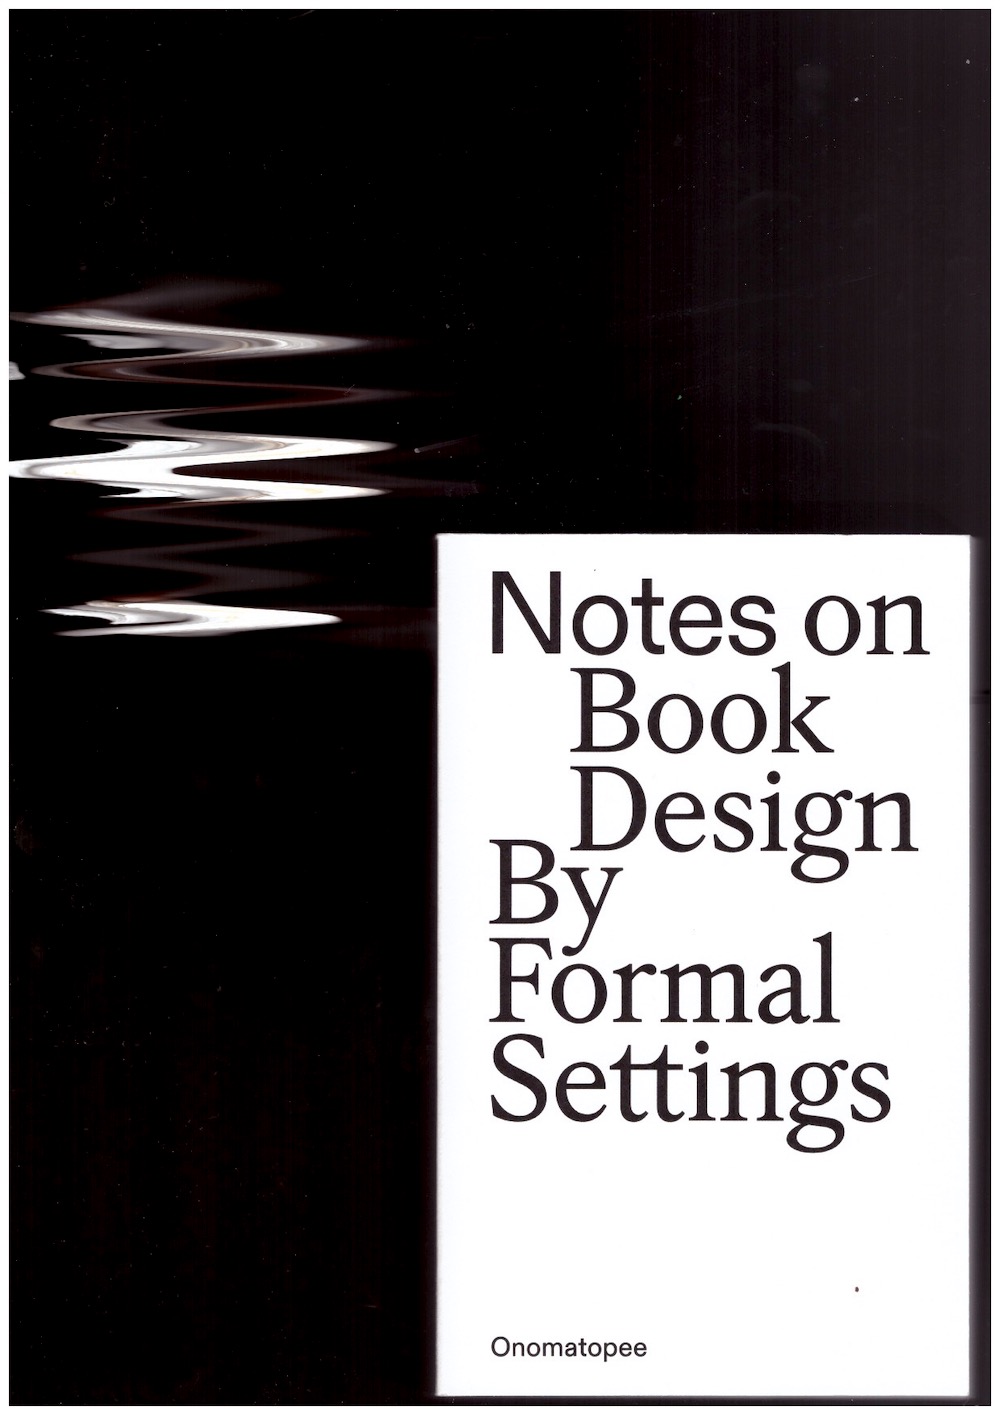 FORMAL SETTINGS - Notes on Book Design